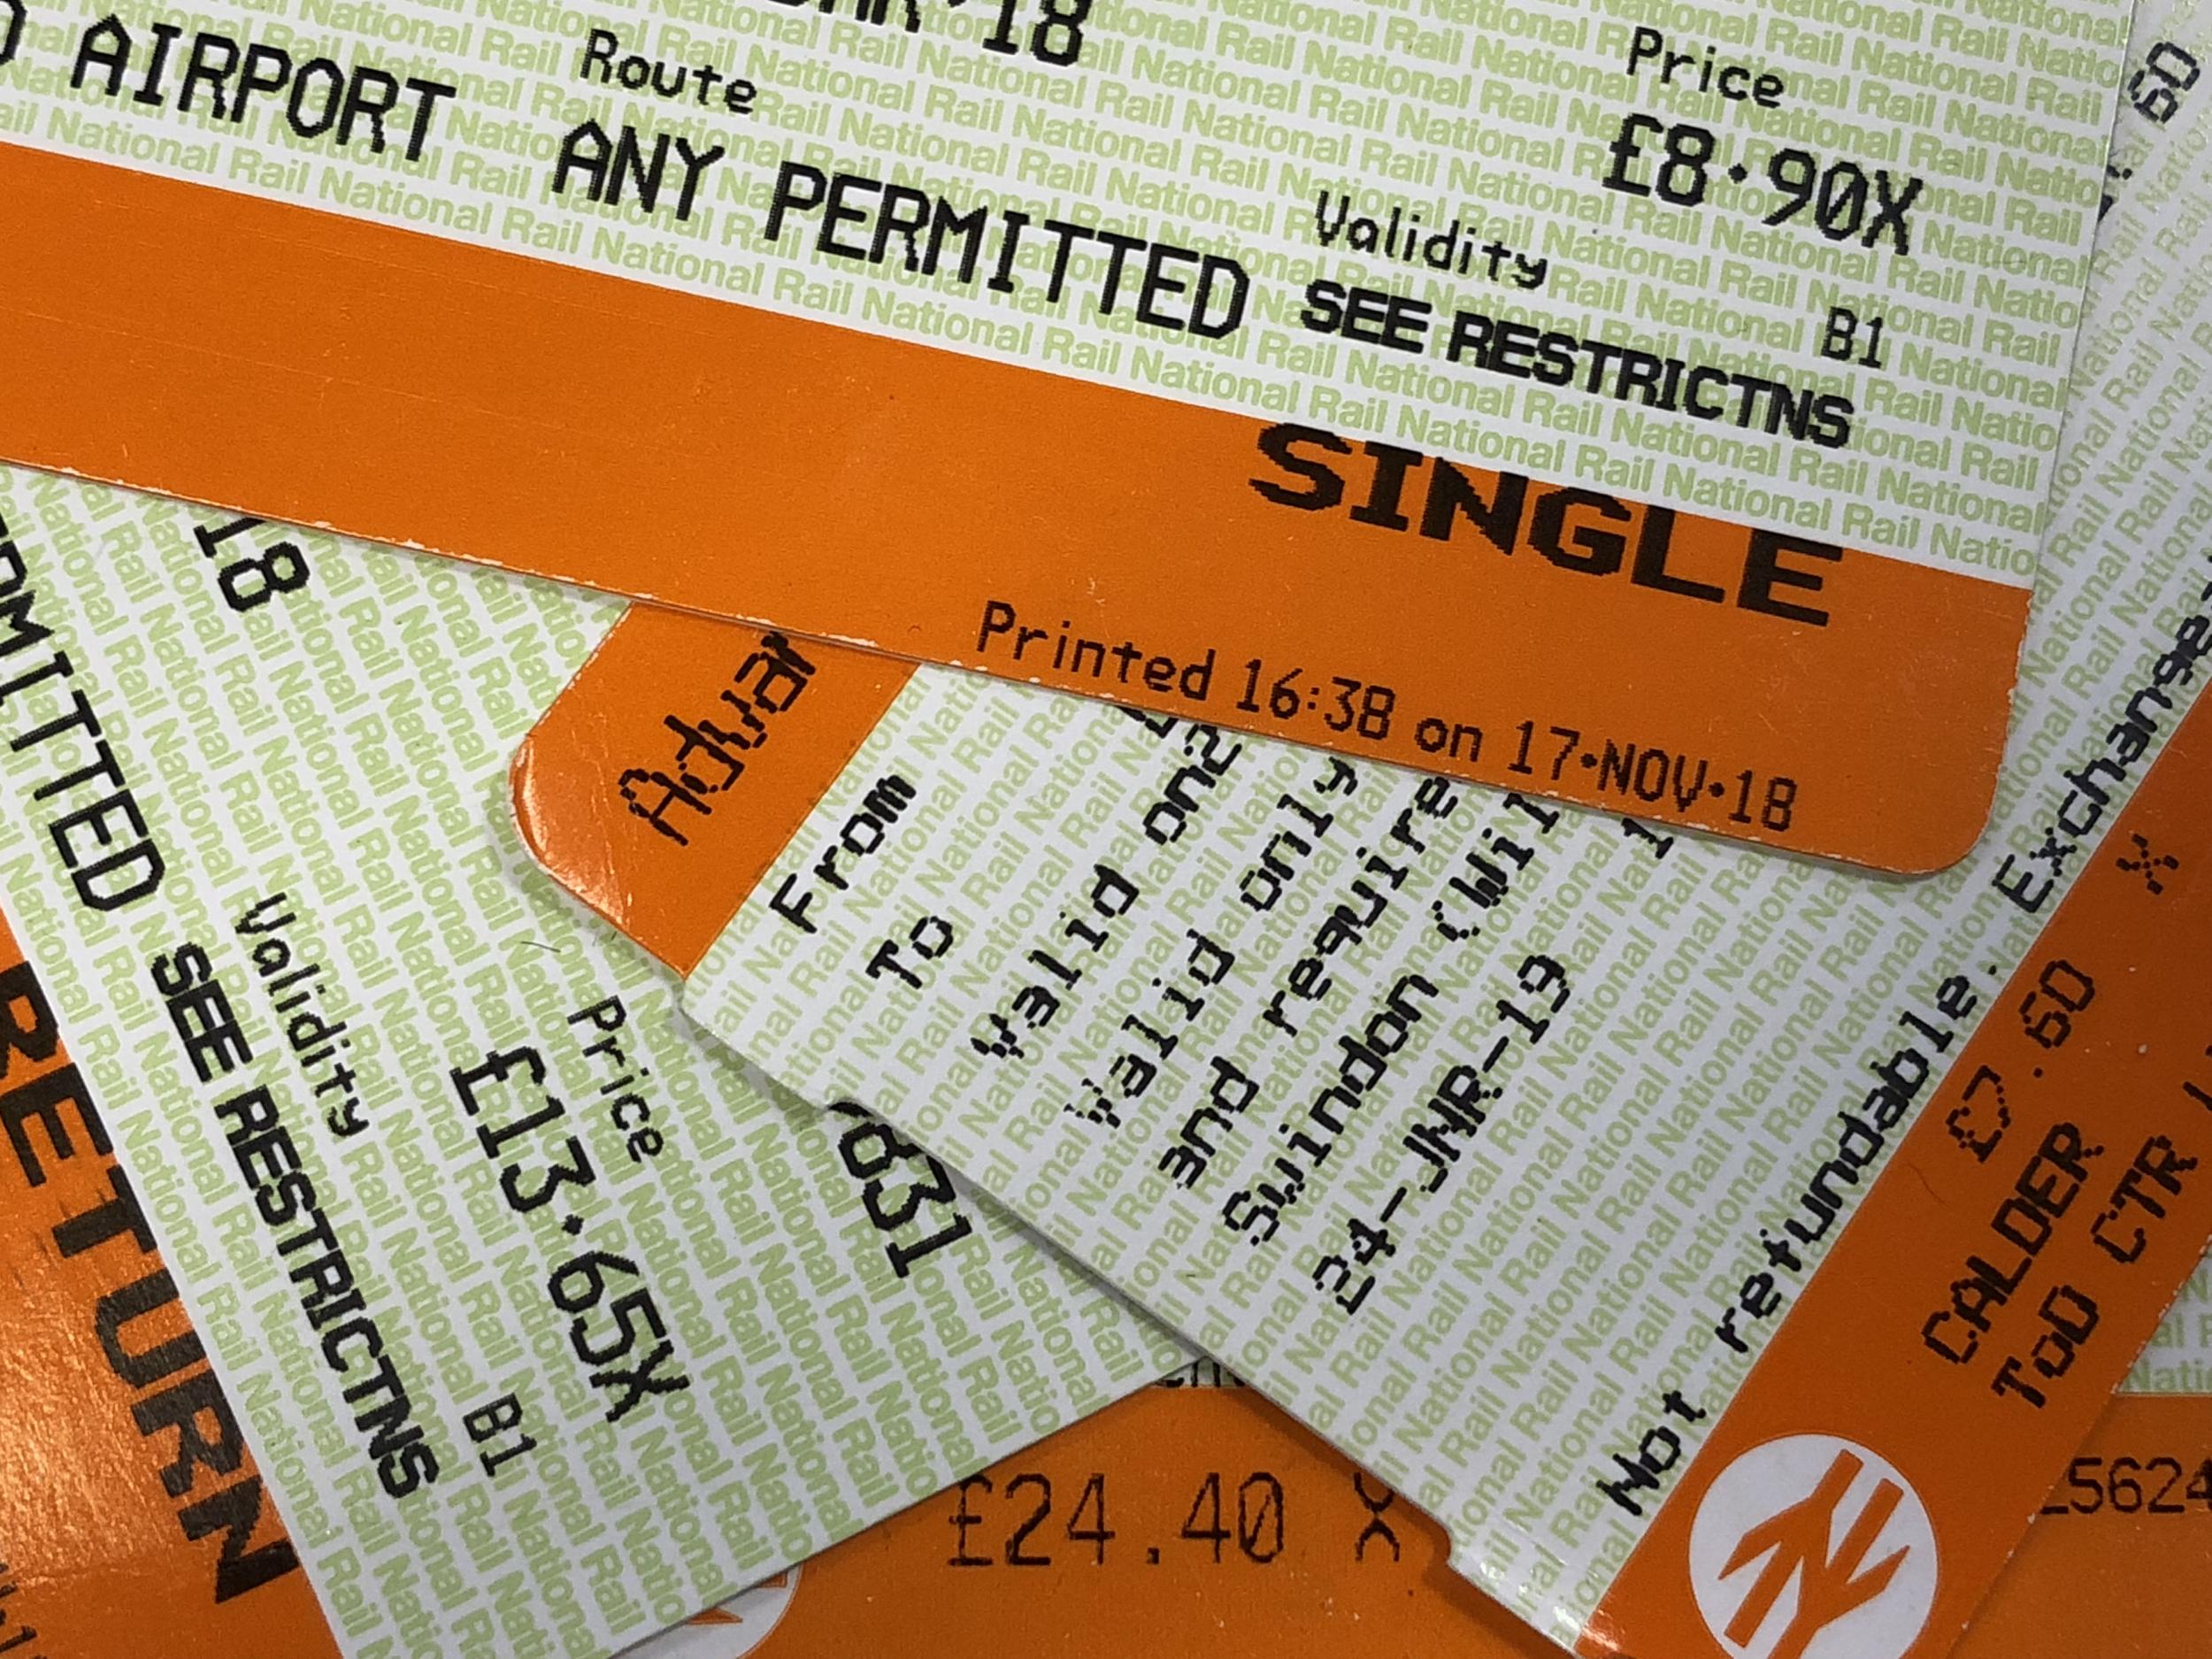 Fair fares? Rail ticket increases have outstripped consumer prices and average wages